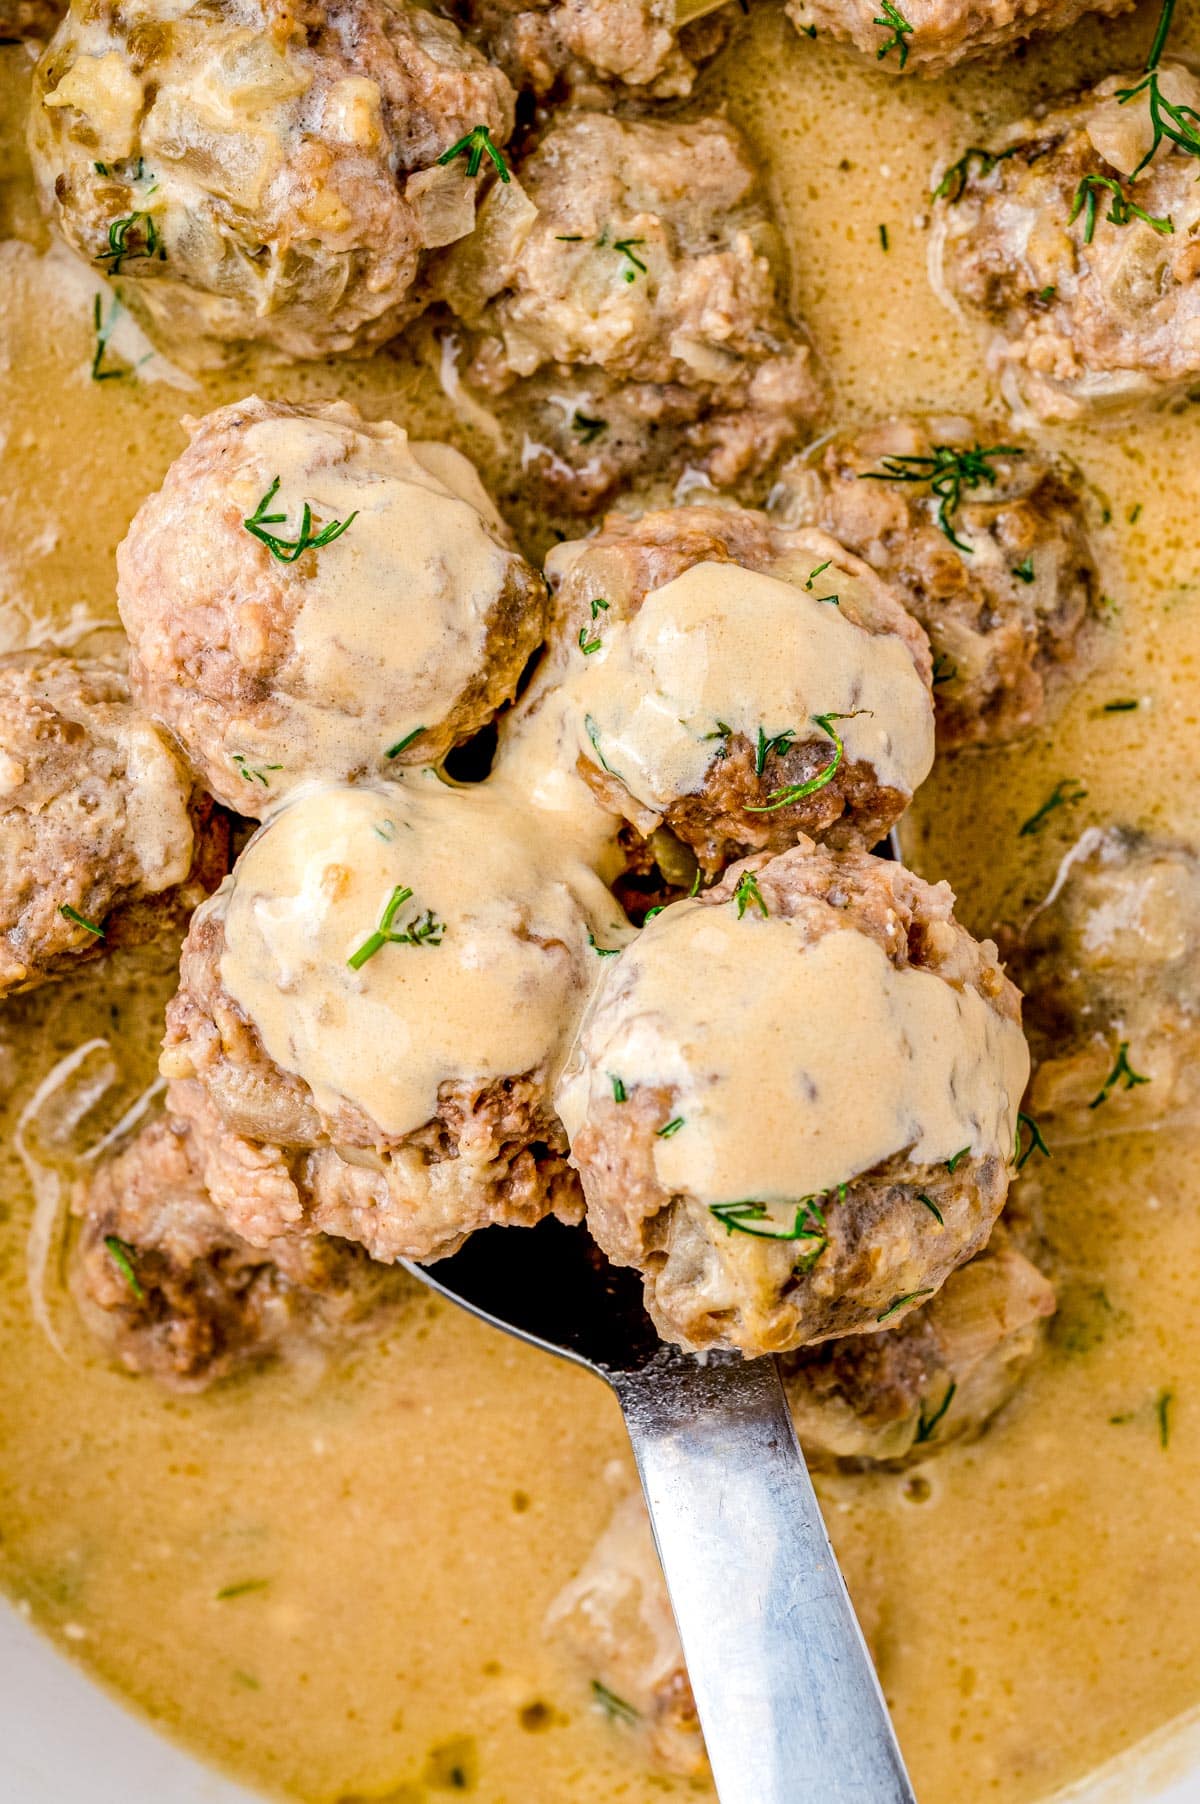 A close up picture of the Slow Cooker Swedish Meatballs being scooped up with a spoon.